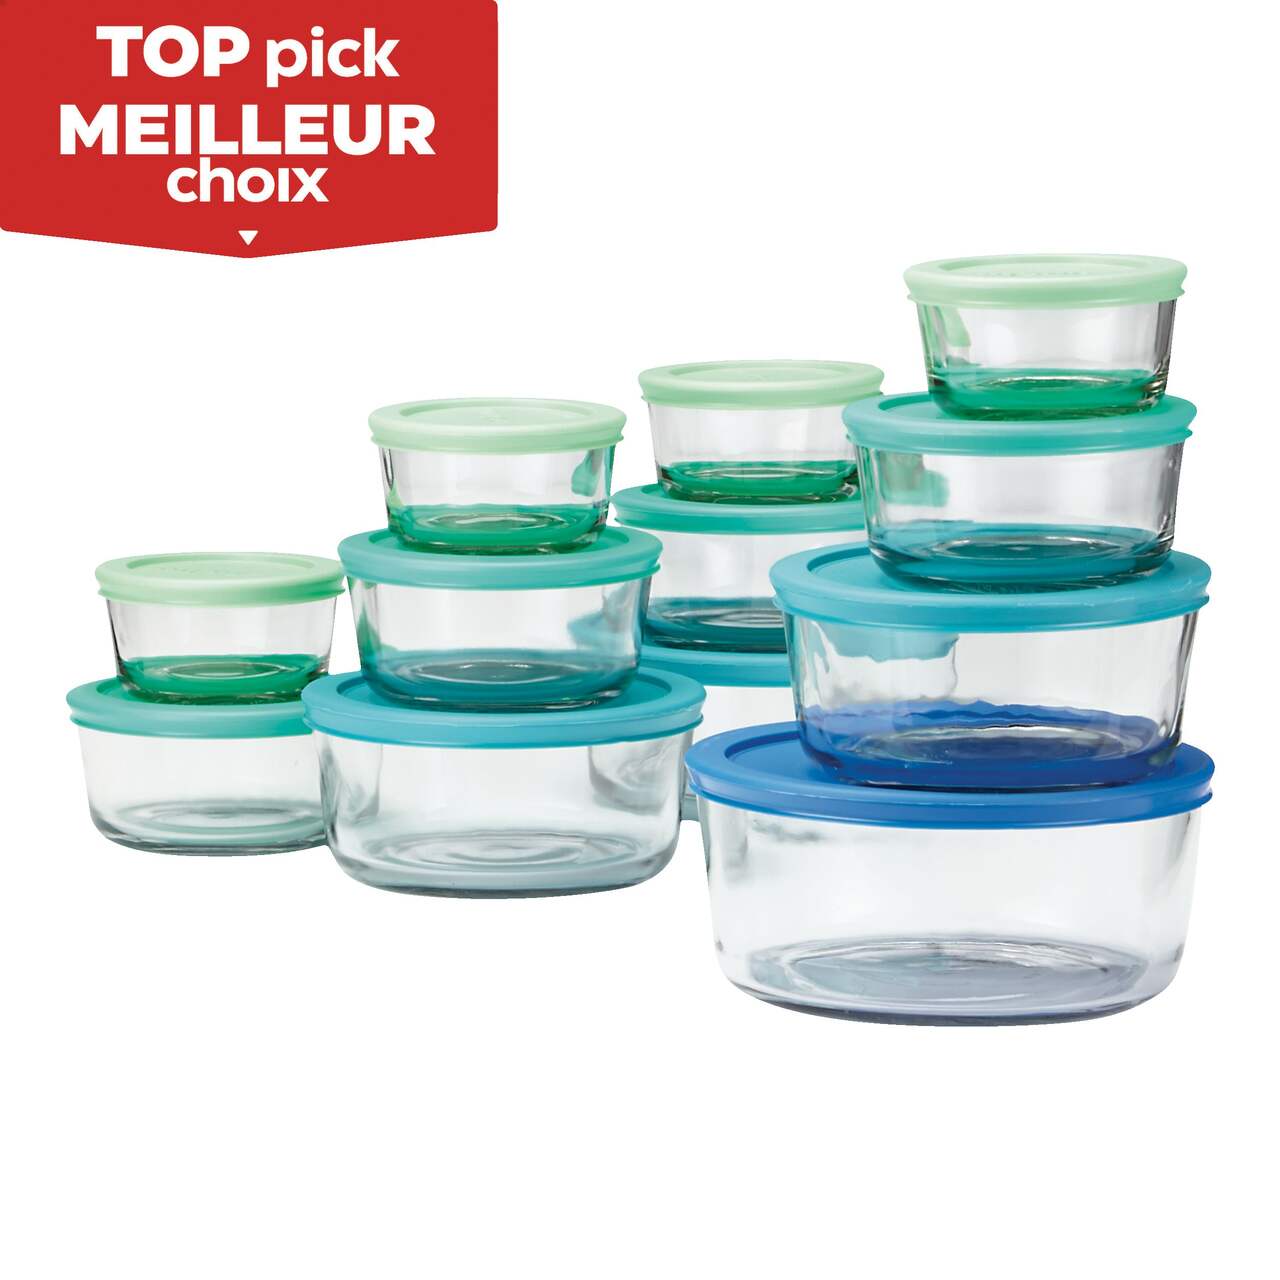 https://media-www.canadiantire.ca/product/living/kitchen/bakeware-baking-prep/1423944/anchor-24-piece-bakeware-set-abdb1275-f14a-4bc0-afb2-1a0de56813b8-jpgrendition.jpg?imdensity=1&imwidth=640&impolicy=mZoom